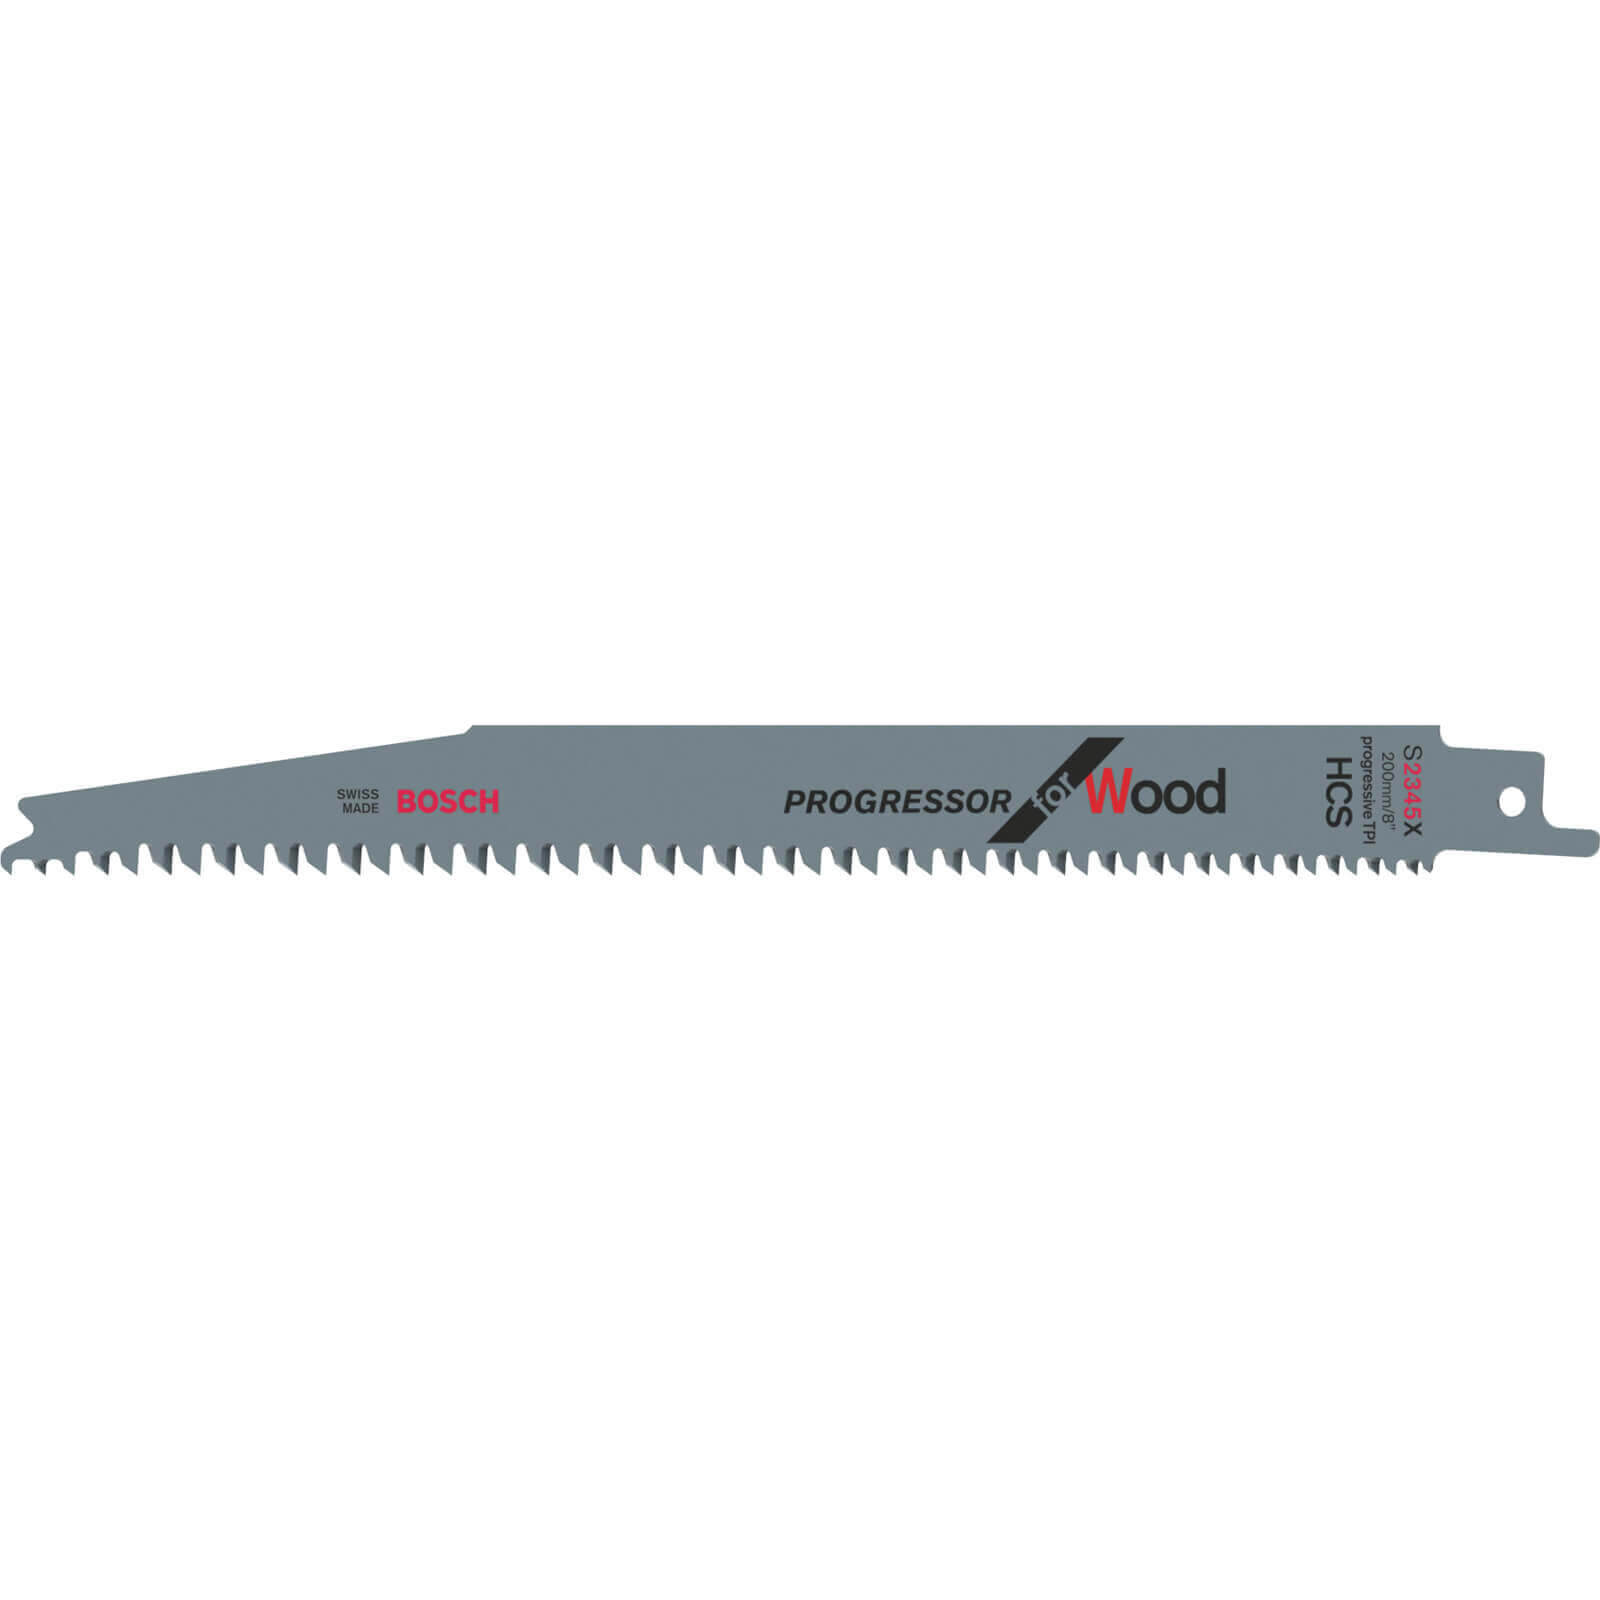 Photo of Bosch S2345k Progressor Wood Cutting Reciprocating Saw Blades Pack Of 2